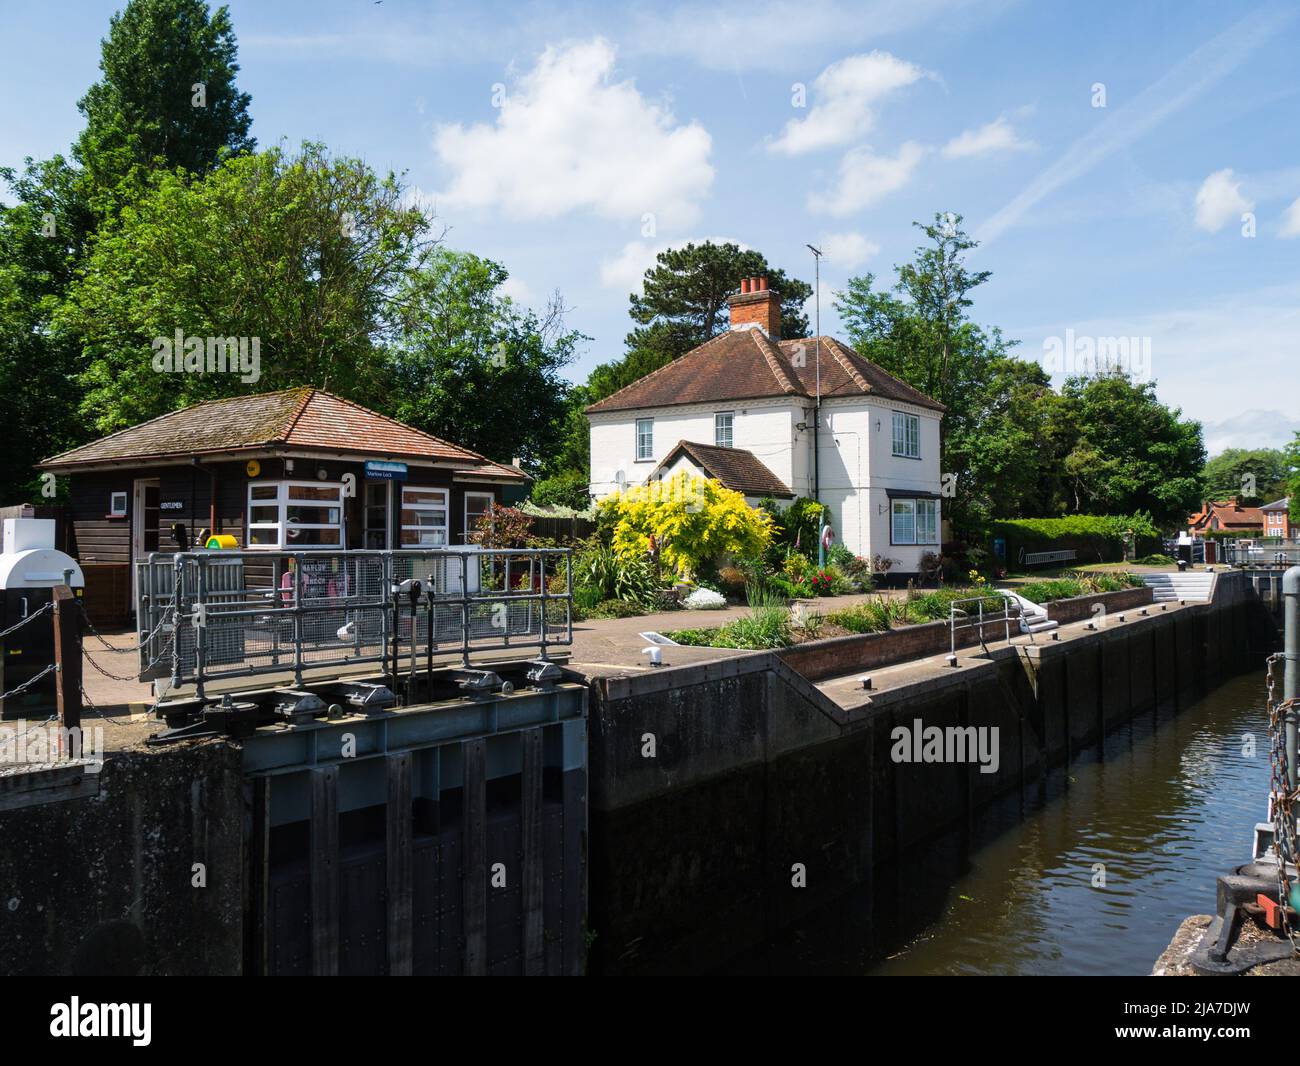 Lock keeper's cottage at Marlow Lock on River Thames Marlow Buckinghamshire England UK Stock Photo